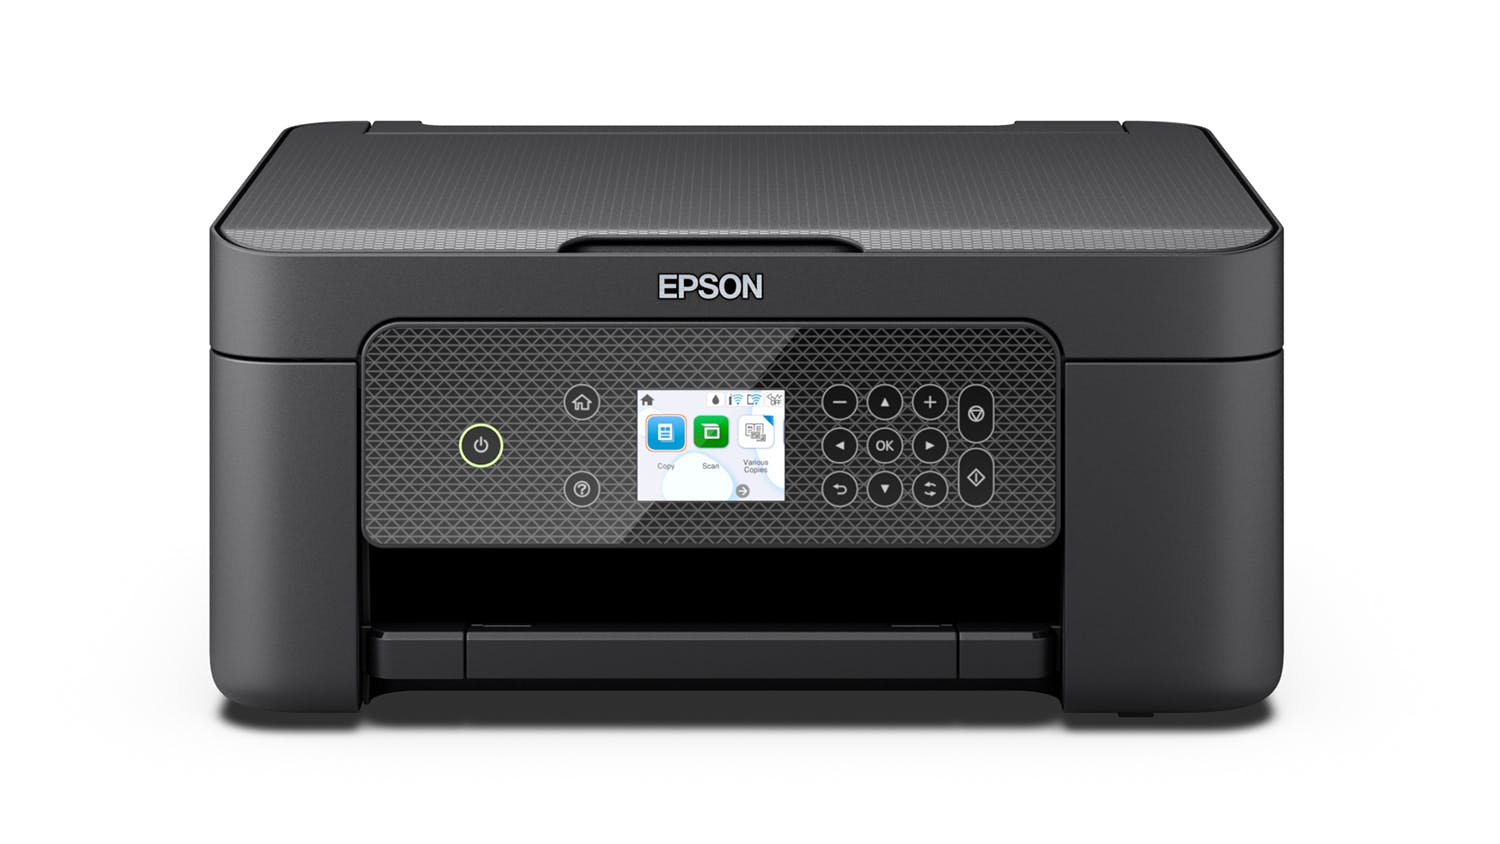 Epson Expression Home XP-4200 A4 All-in-One Inkjet Printer | Norman New Zealand